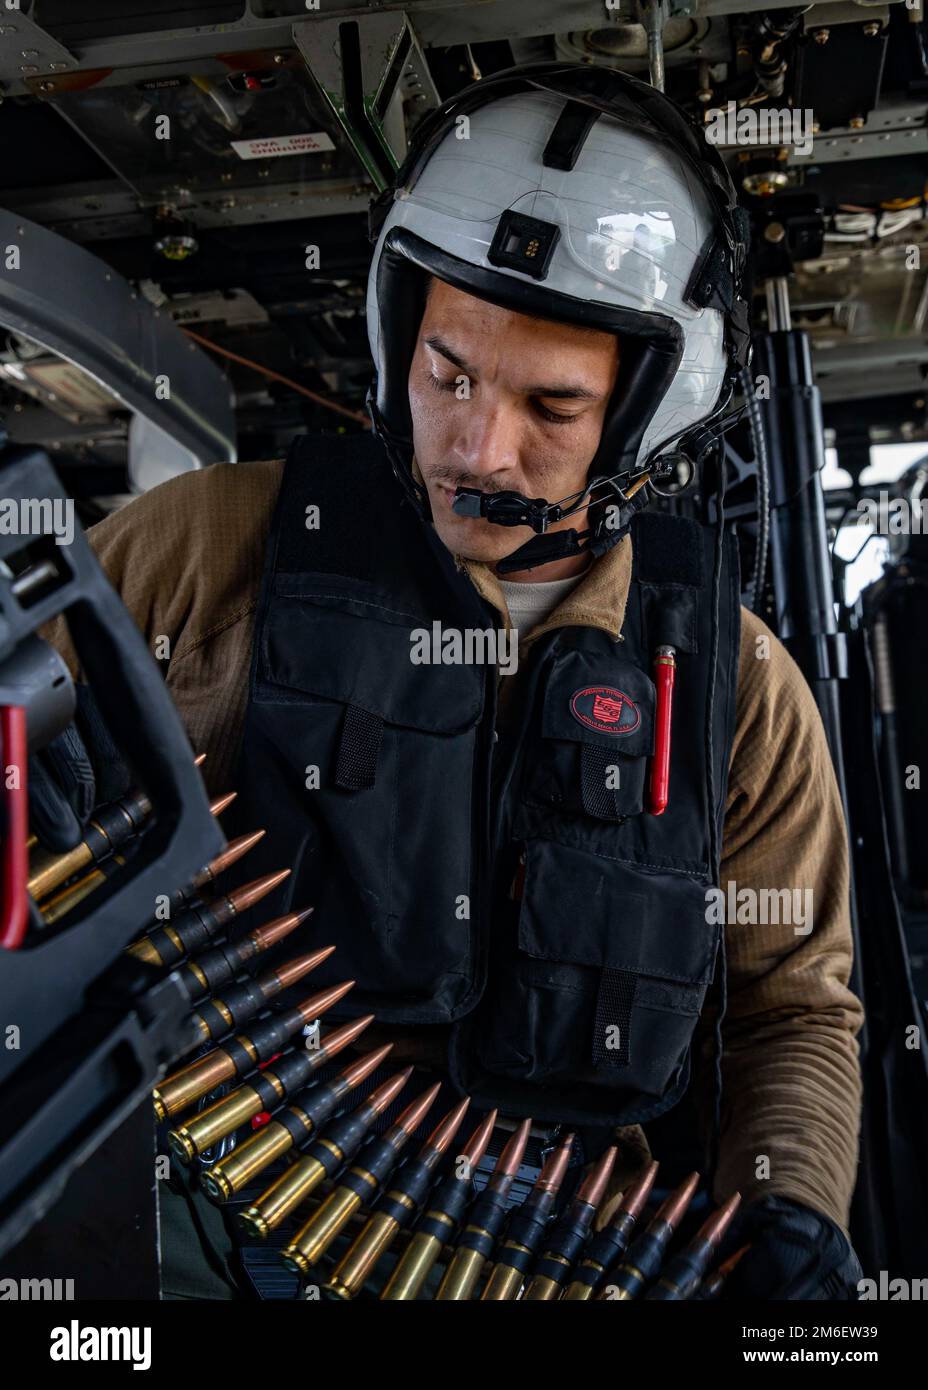 Naval Aircrewman (helicopter) 3rd Class Daniel Brito flies during a gun exercise with Helicopter Sea Combat Squadron (HSC) 5 at Naval Air Station Fallon, April 26, 2022. Carrier Air Wing (CVW) 7 is the offensive air and strike component of Carrier Strike Group (CSG) 10 and the George H.W. Bush CSG. The squadrons of CVW-7 are Strike Fighter Squadron (VFA) 143; VFA-103; VFA-86; VFA-136; Electronic Attack Squadron (VAQ) 140; Carrier Airborne Early Warning Squadron (VAW) 121; HSC-5; and Helicopter Maritime Strike Squadron (HSM) 46. Stock Photo